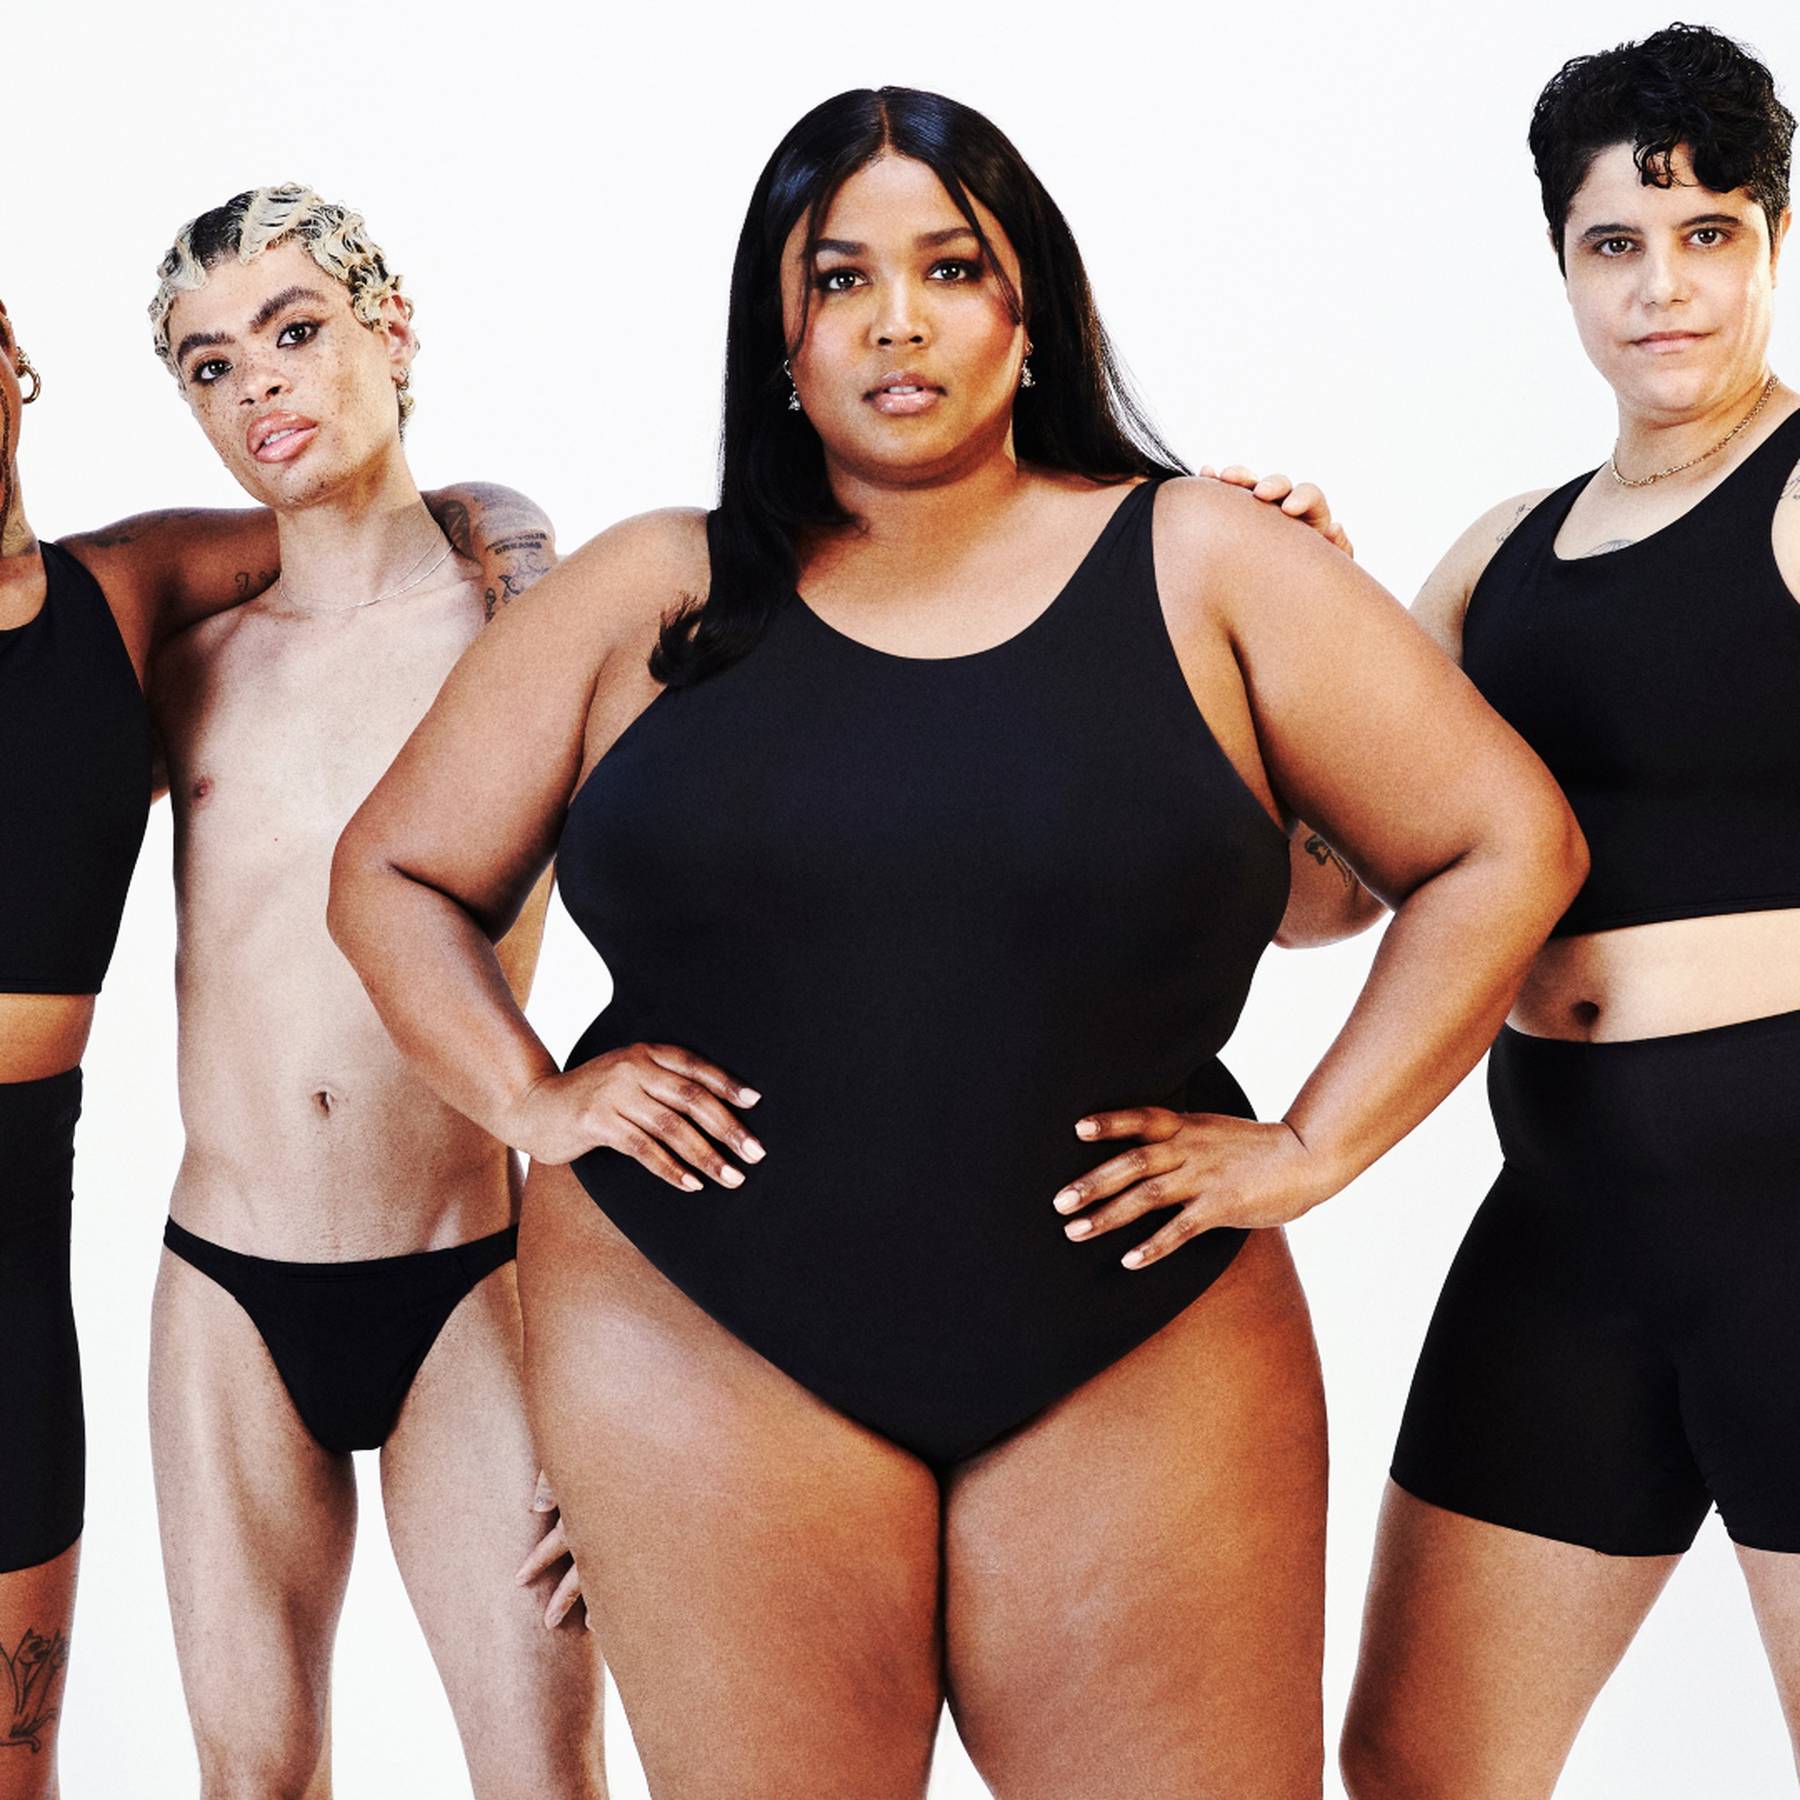 6 best styles from Lizzo's Yitty all-inclusive shapewear launch